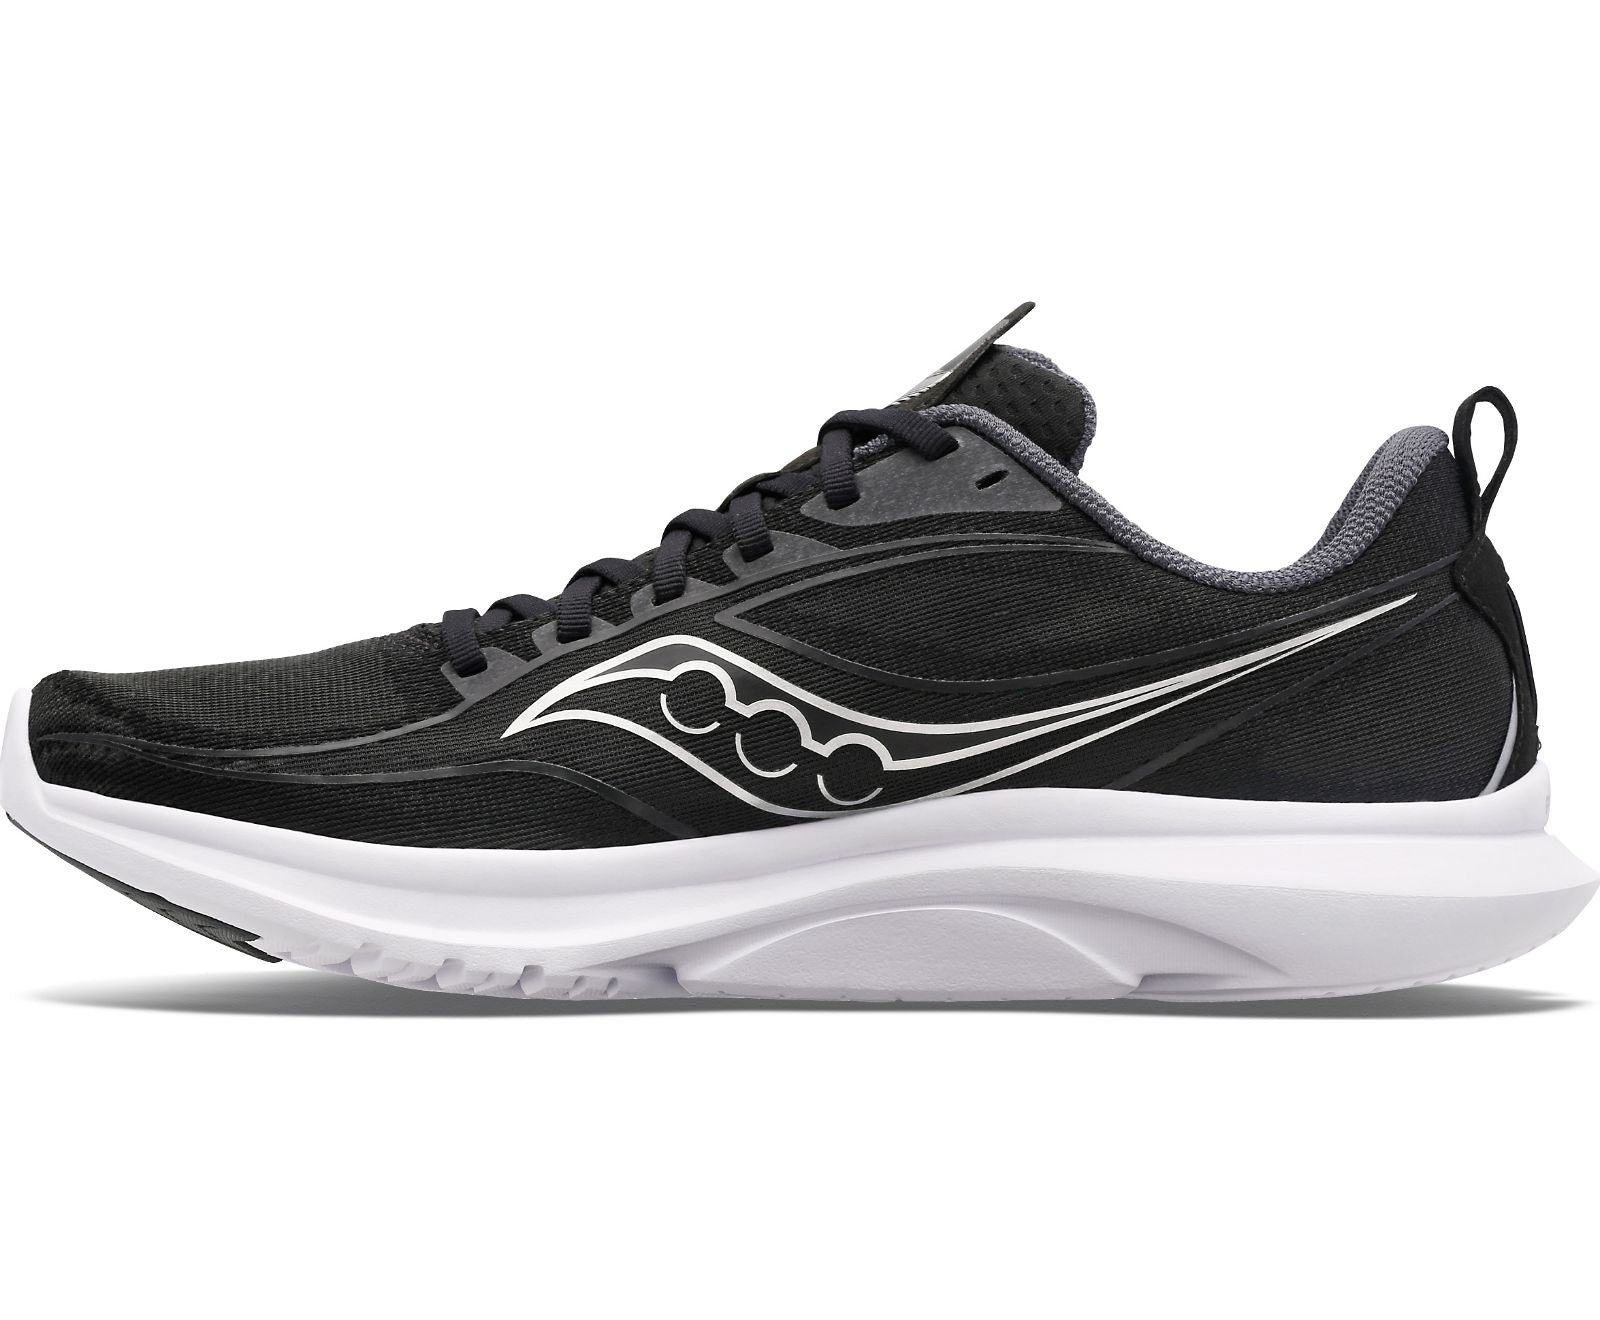 Medial view of the Men's Kinvara 13 by Saucony in Black/Silver